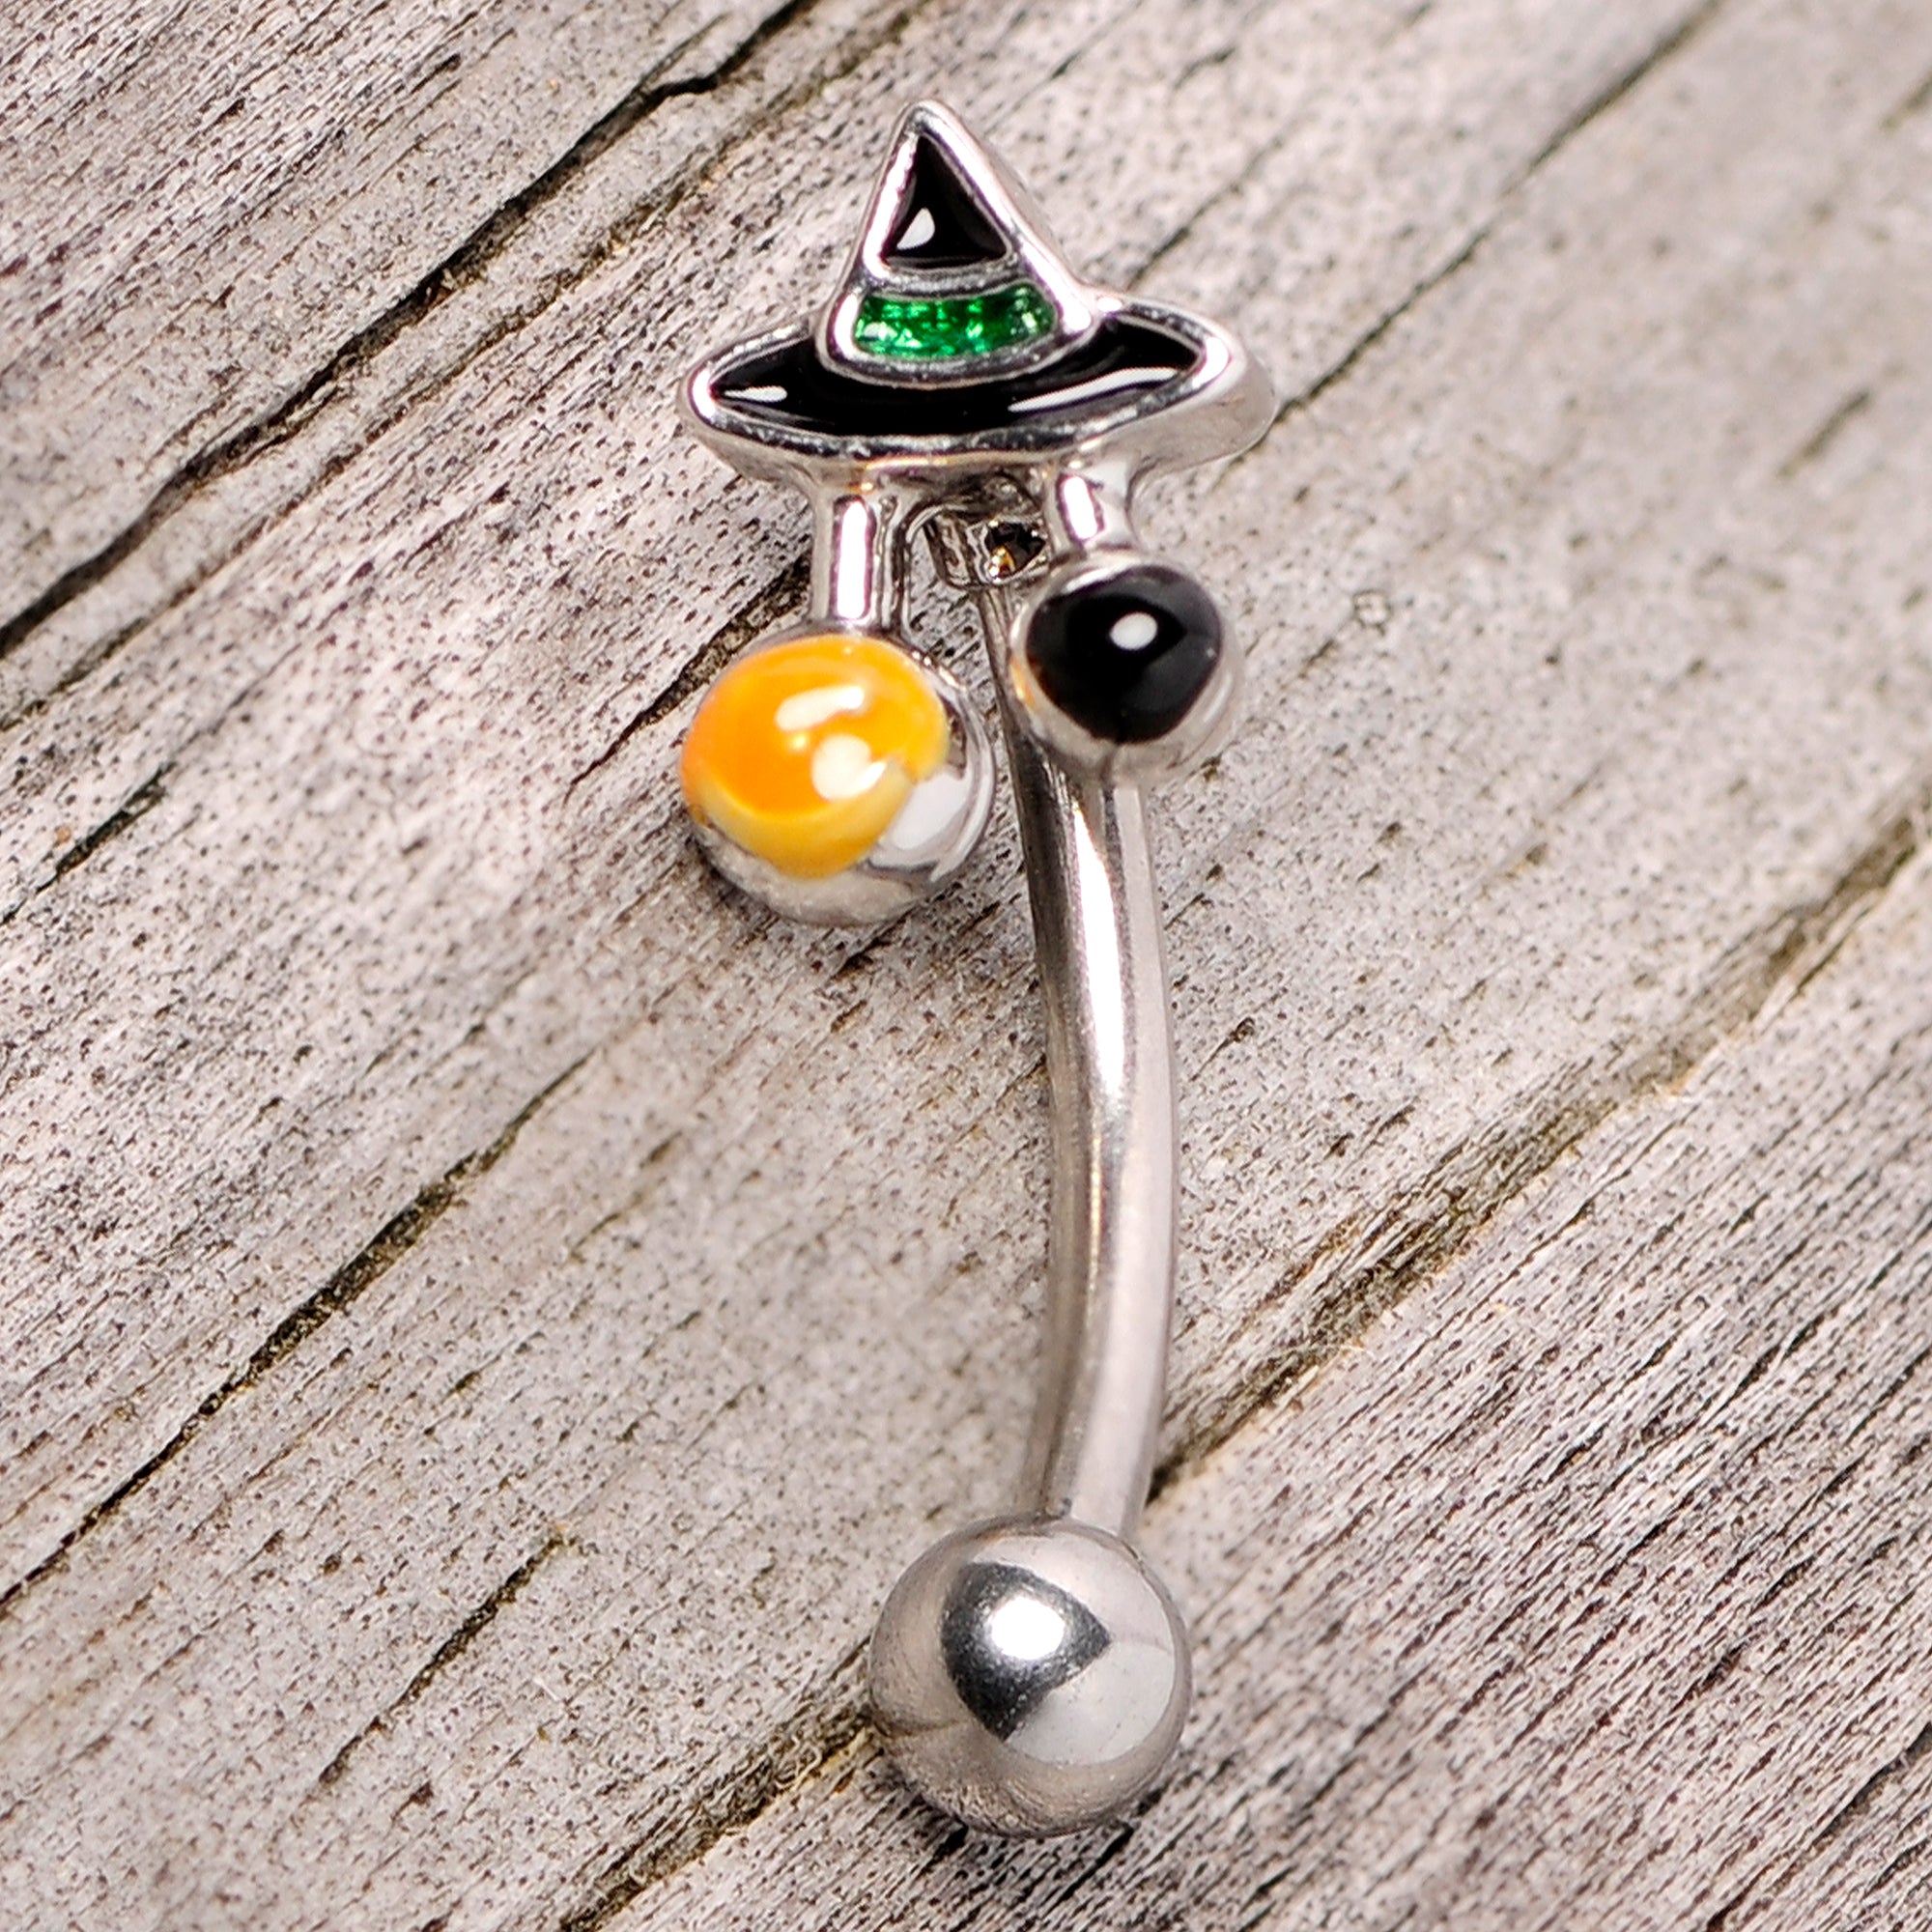 16 Gauge 5/16 Black Green Witches Hat Halloween Curved Eyebrow Ring